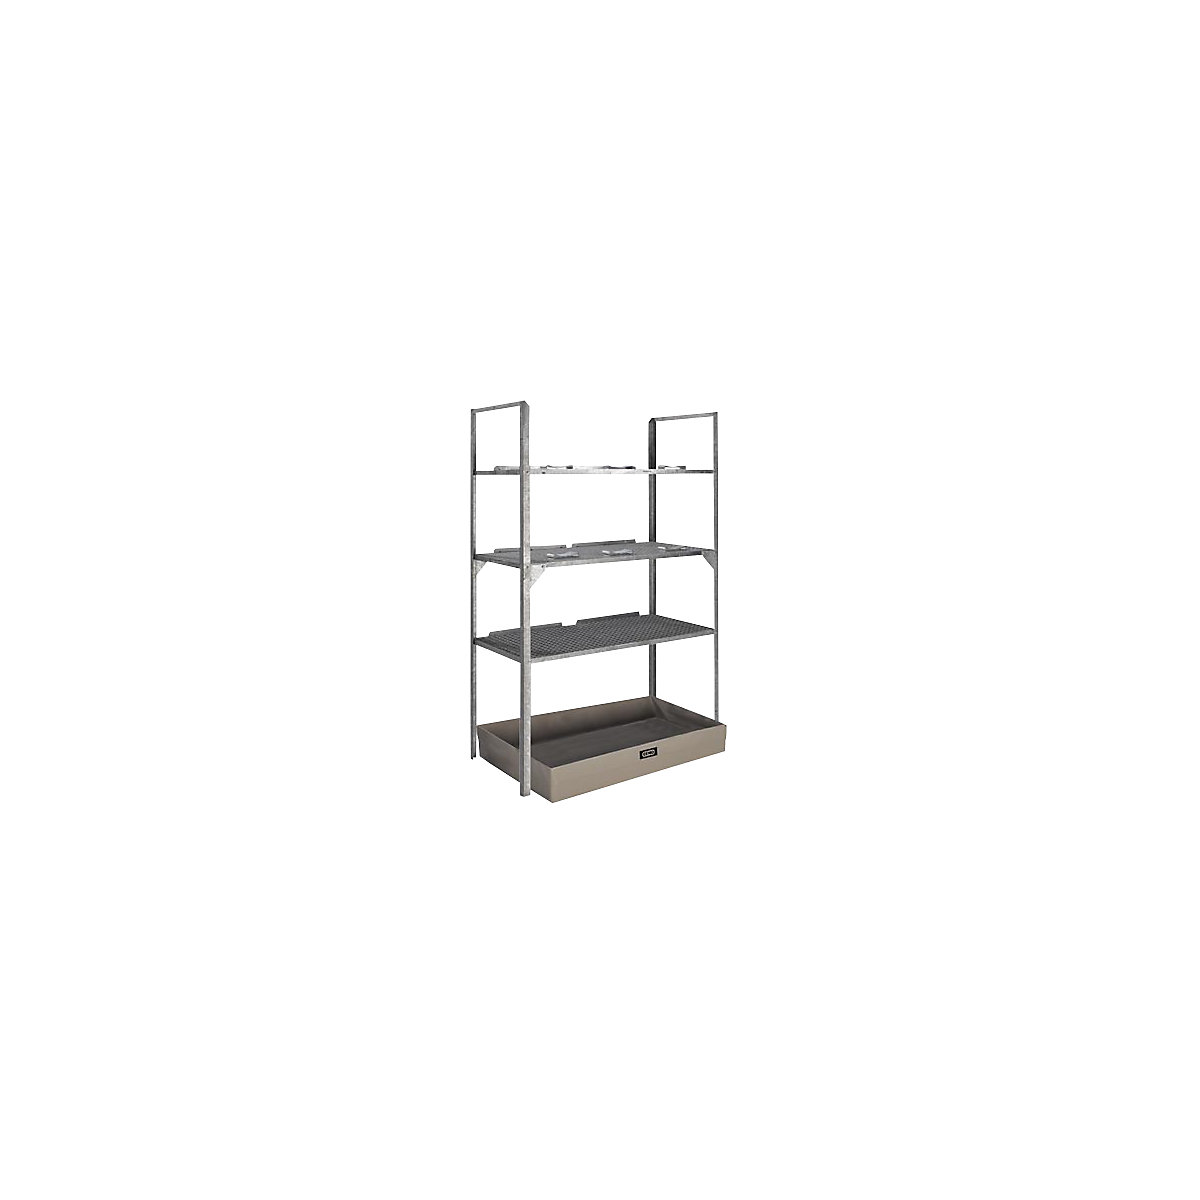 Drum and small container shelf unit – CEMO, with GRP sump tray for 150 l, 3 mesh grid shelves and drum supports-3